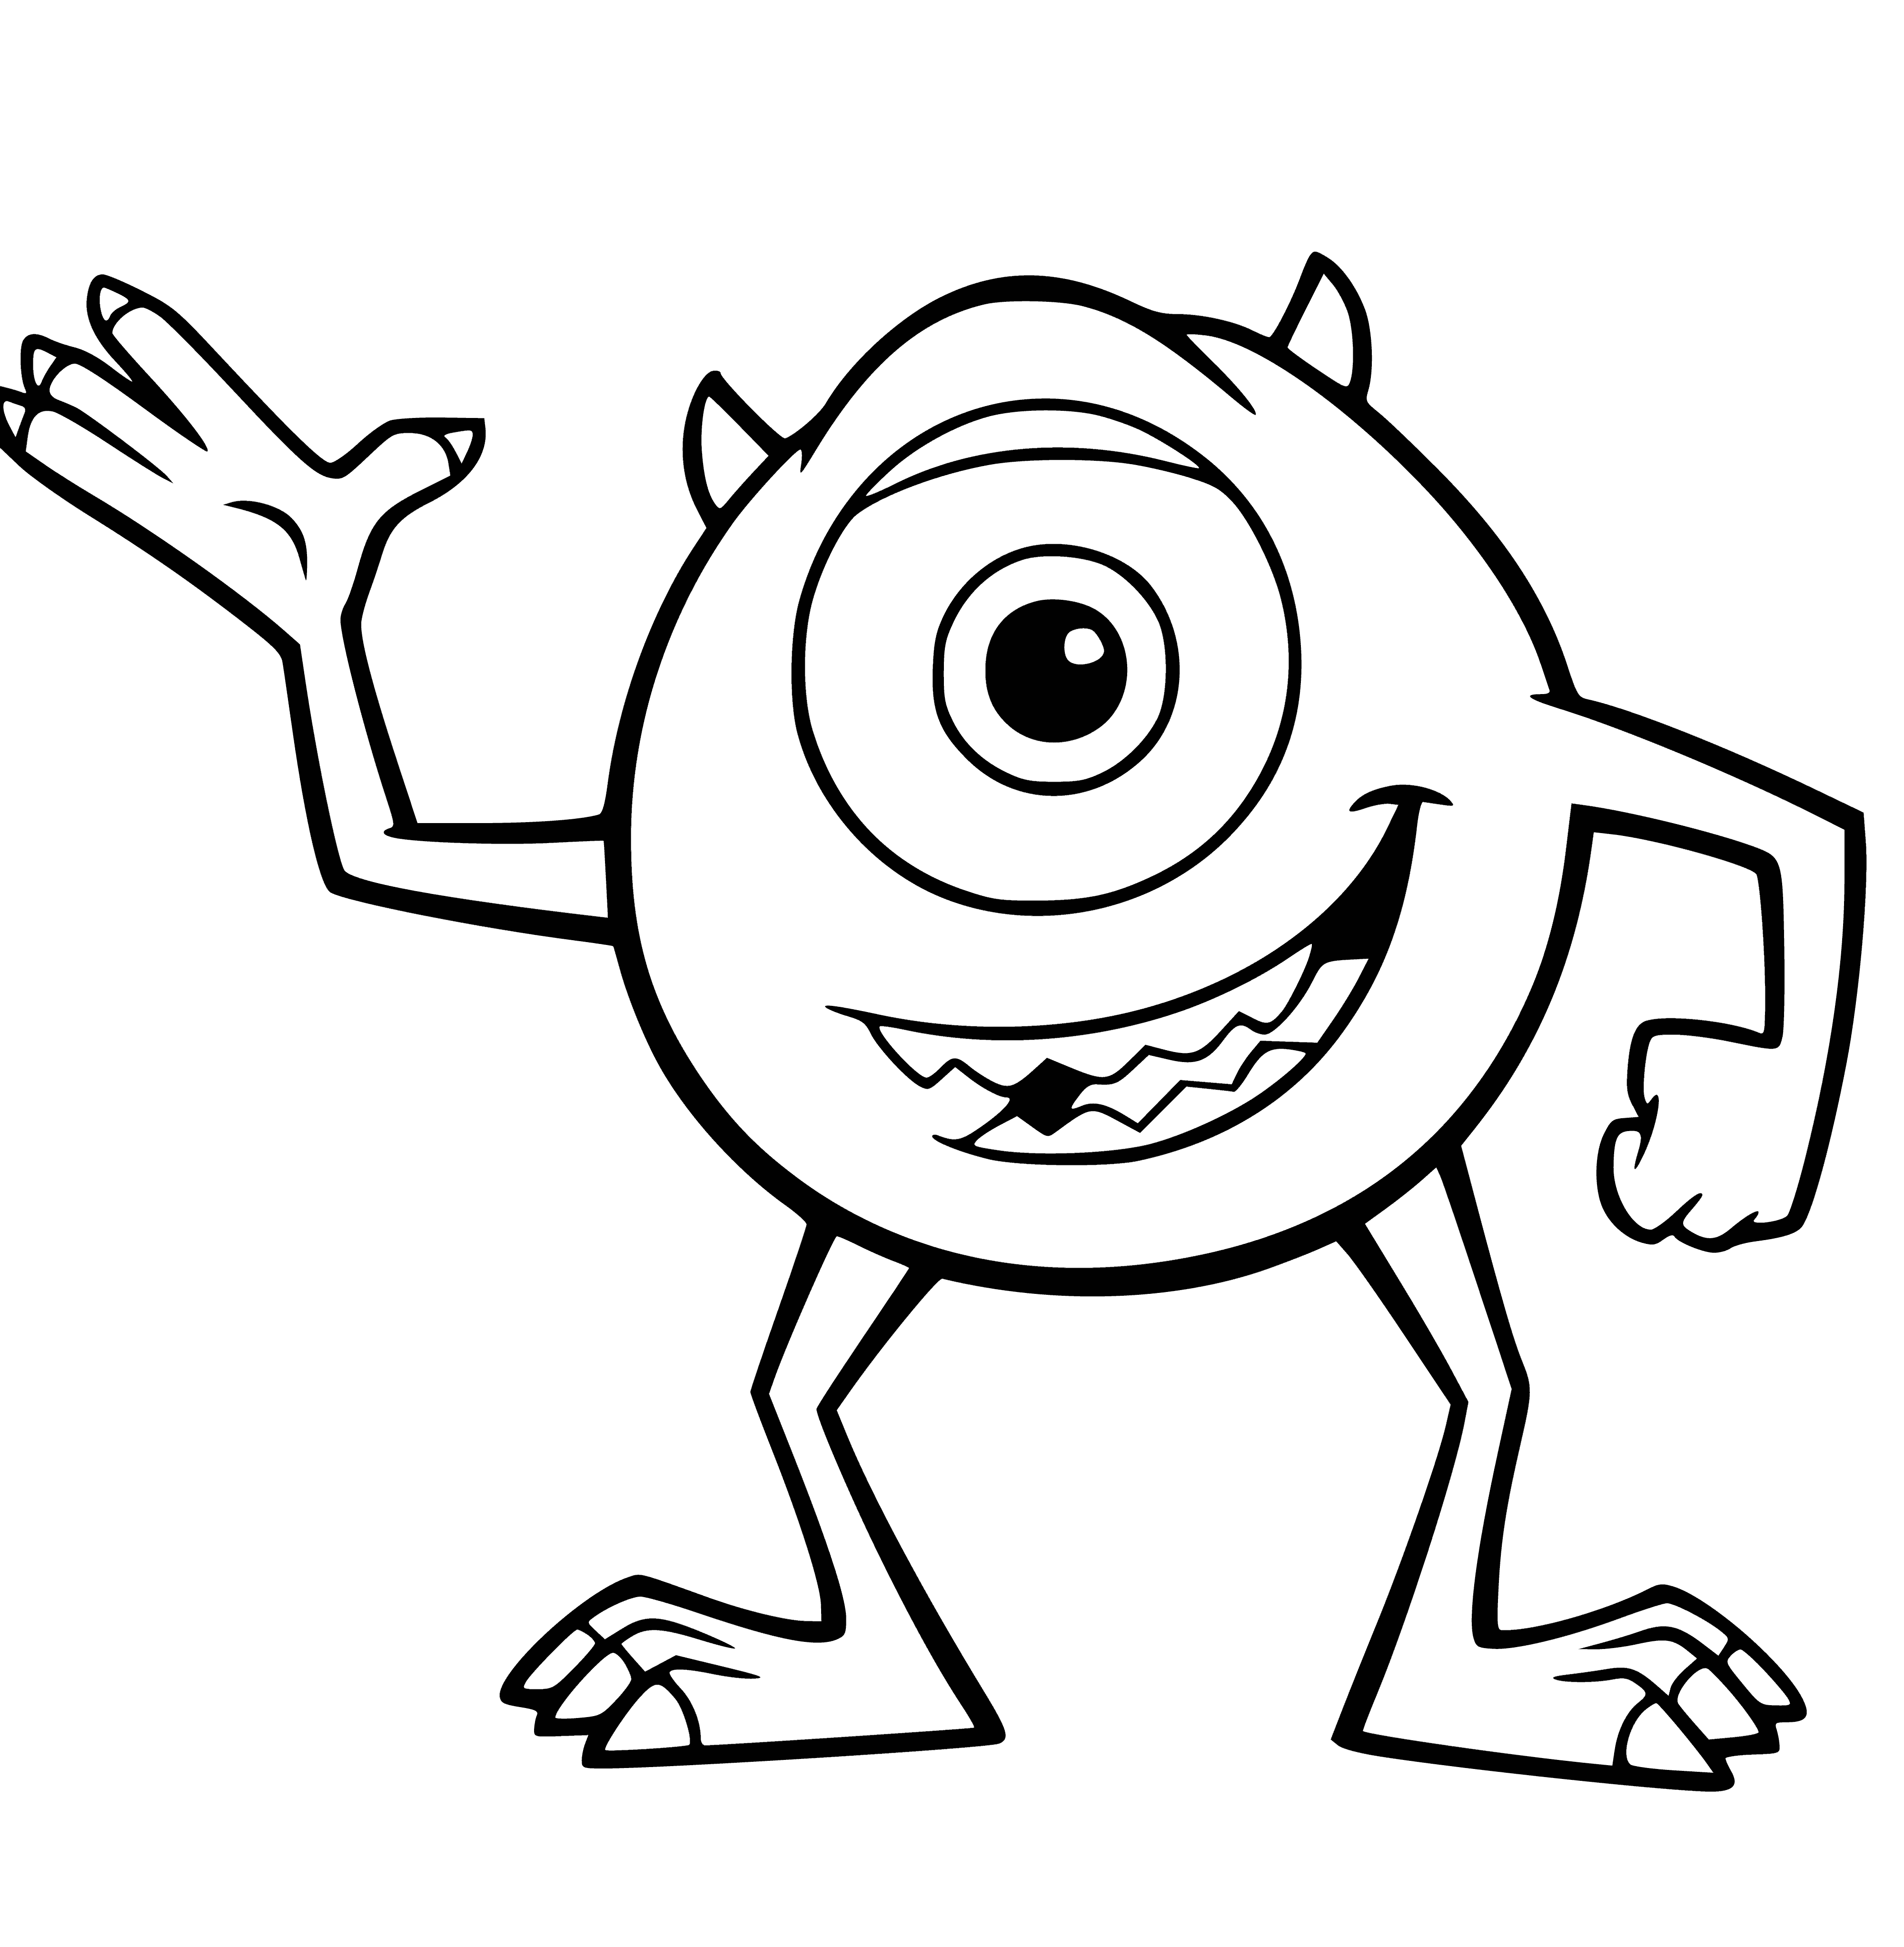 Mike coloring page